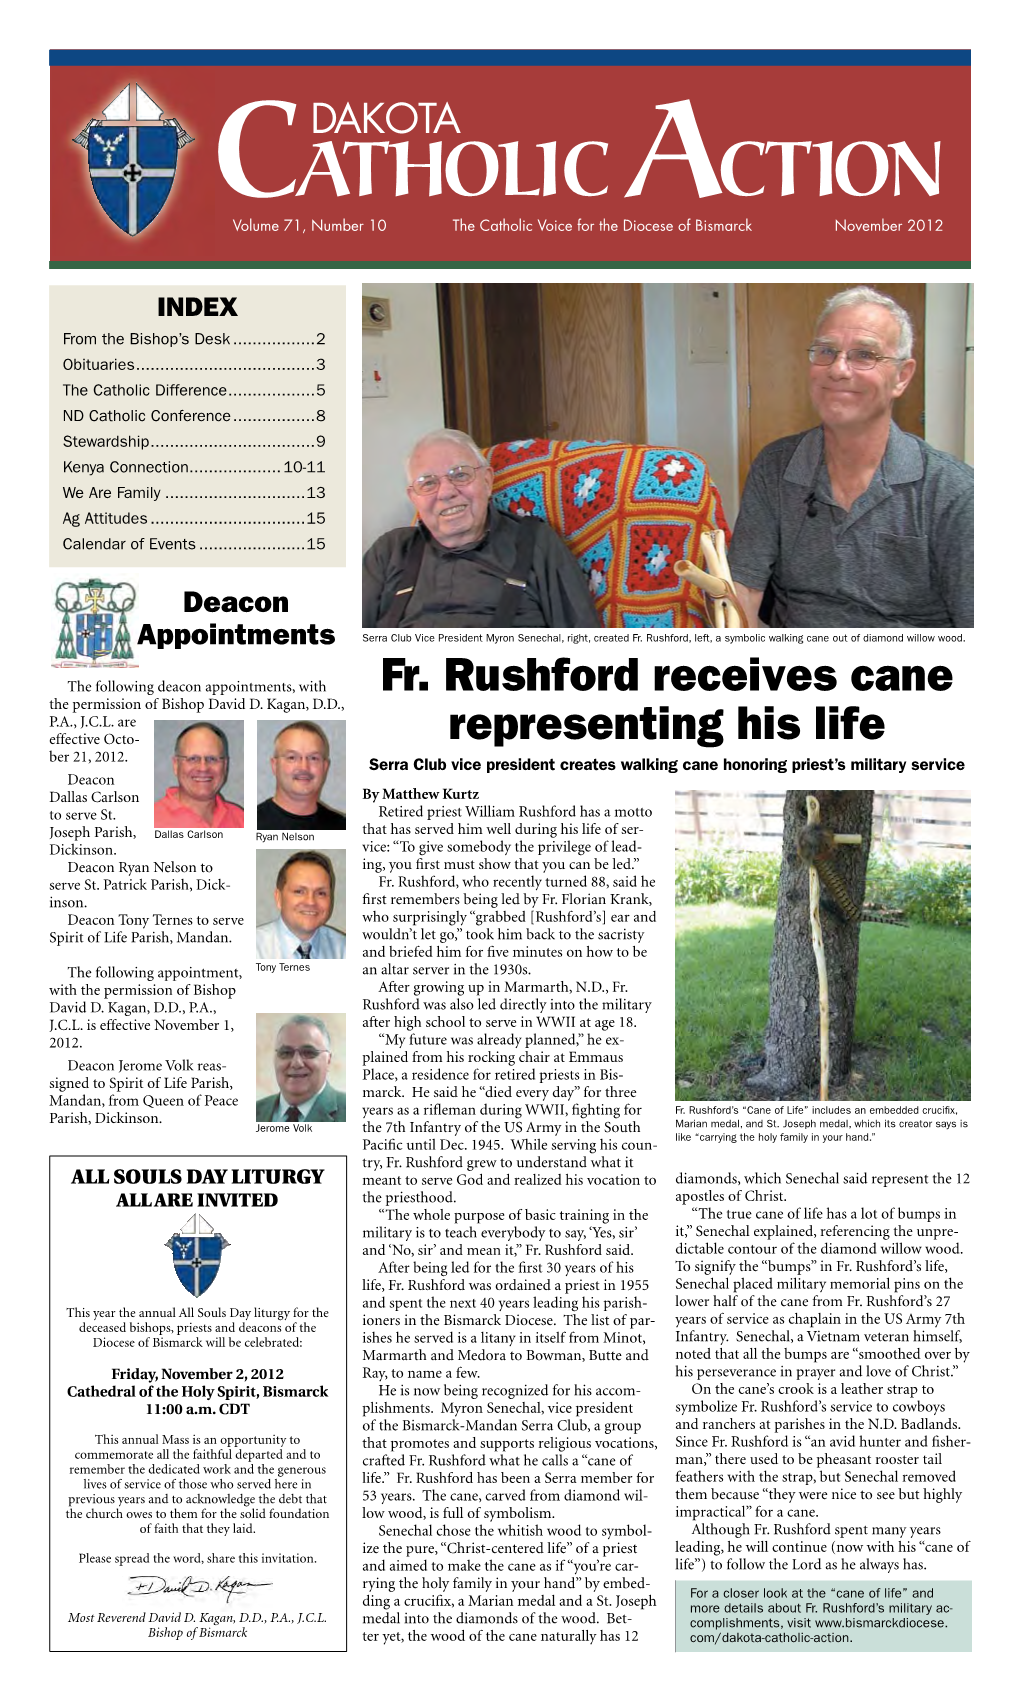 CATHOLIC ACTION Volume 71, Number 10 the Catholic Voice for the Diocese of Bismarck November 2012